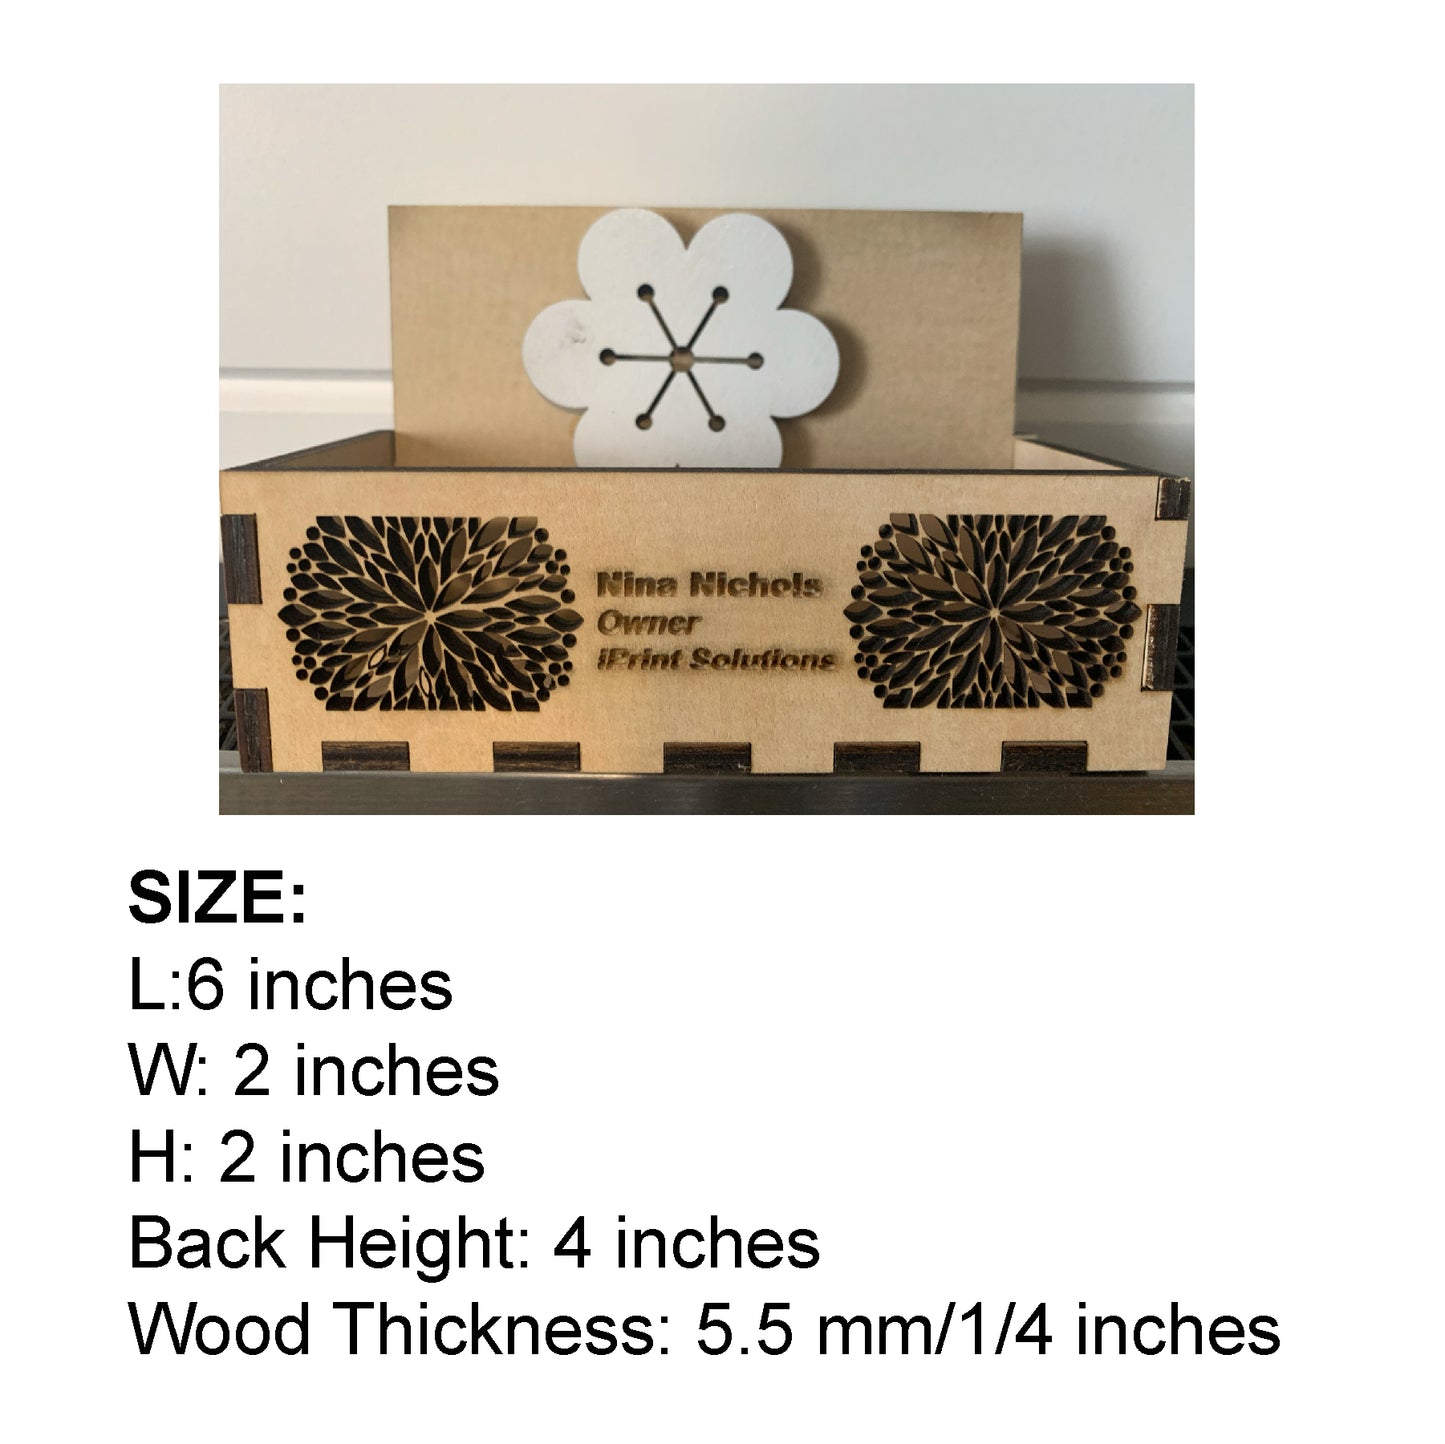 Handcrafted wood business card display, business cards holder, custom box, custom business cards holder, wood holder, wood business cards display